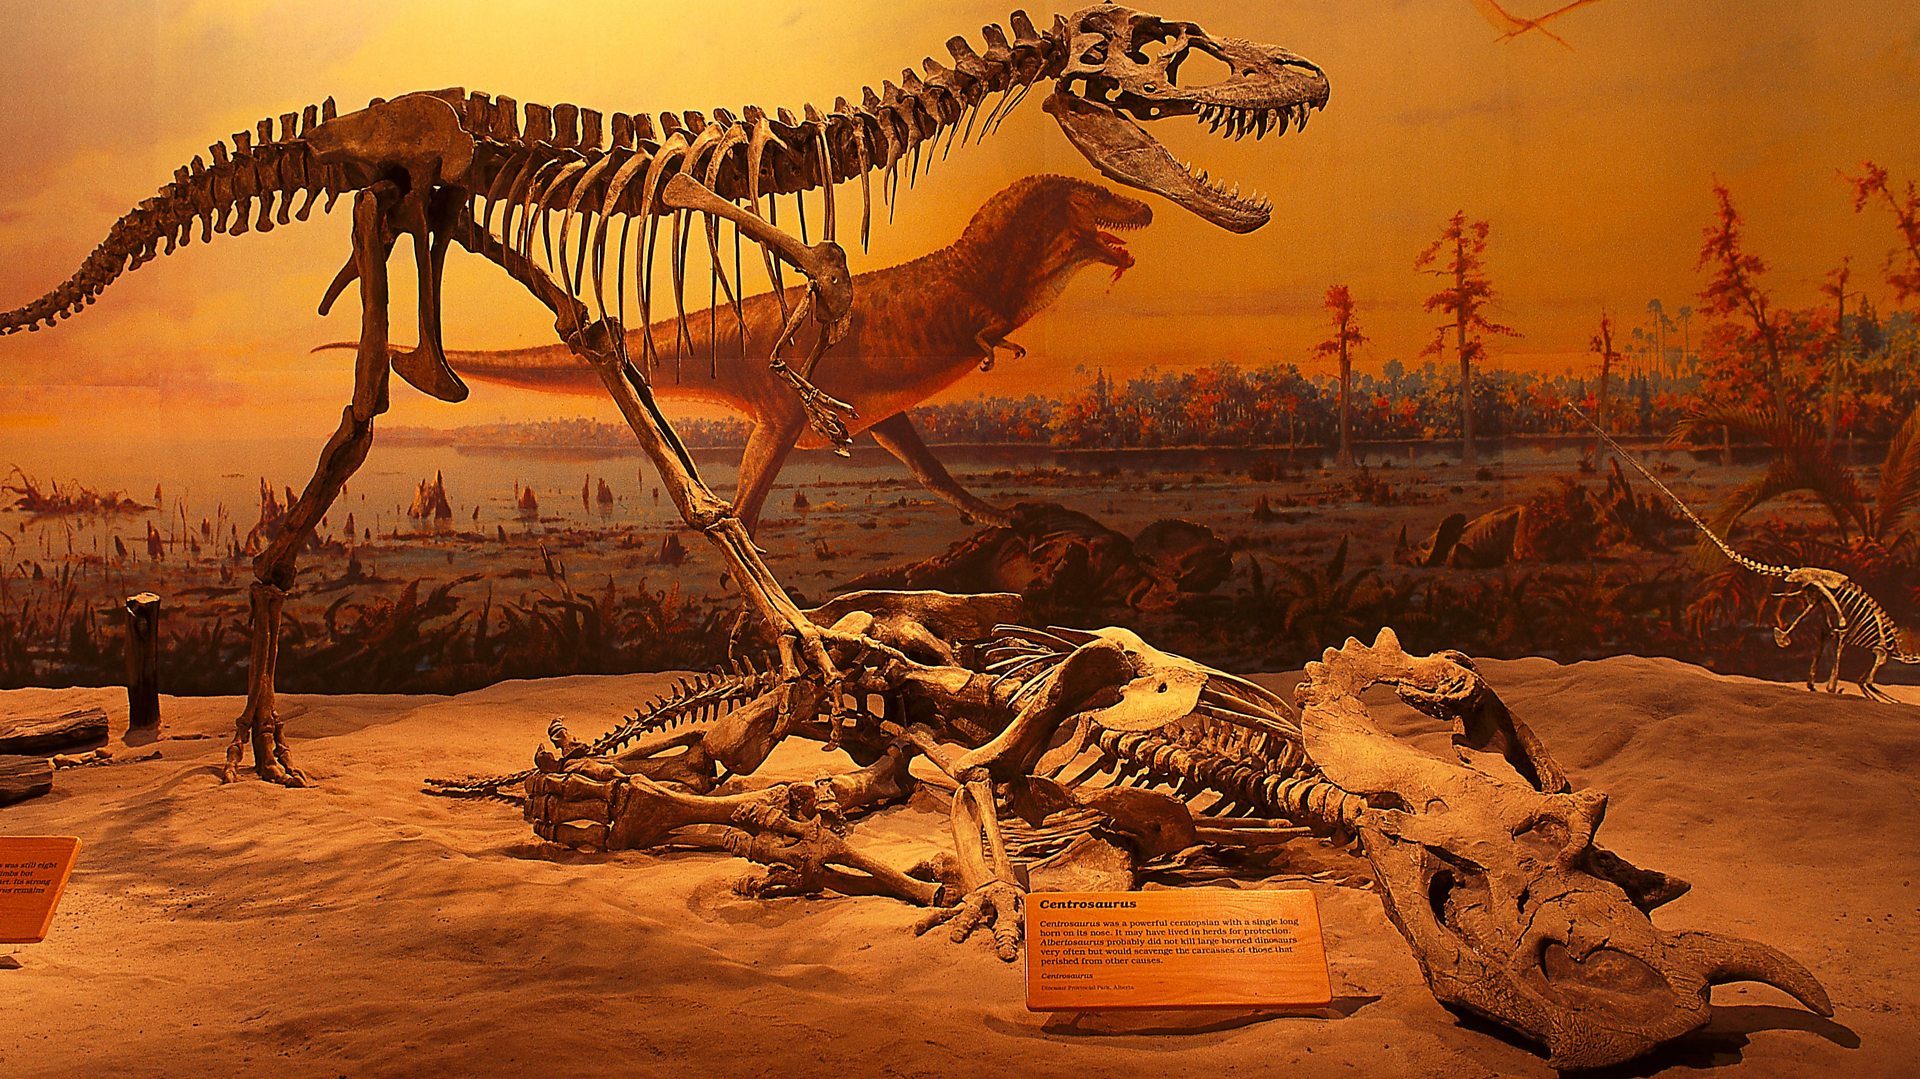 1.7 Billion T. Rexes Lived on Earth. Where Are All the Bones?